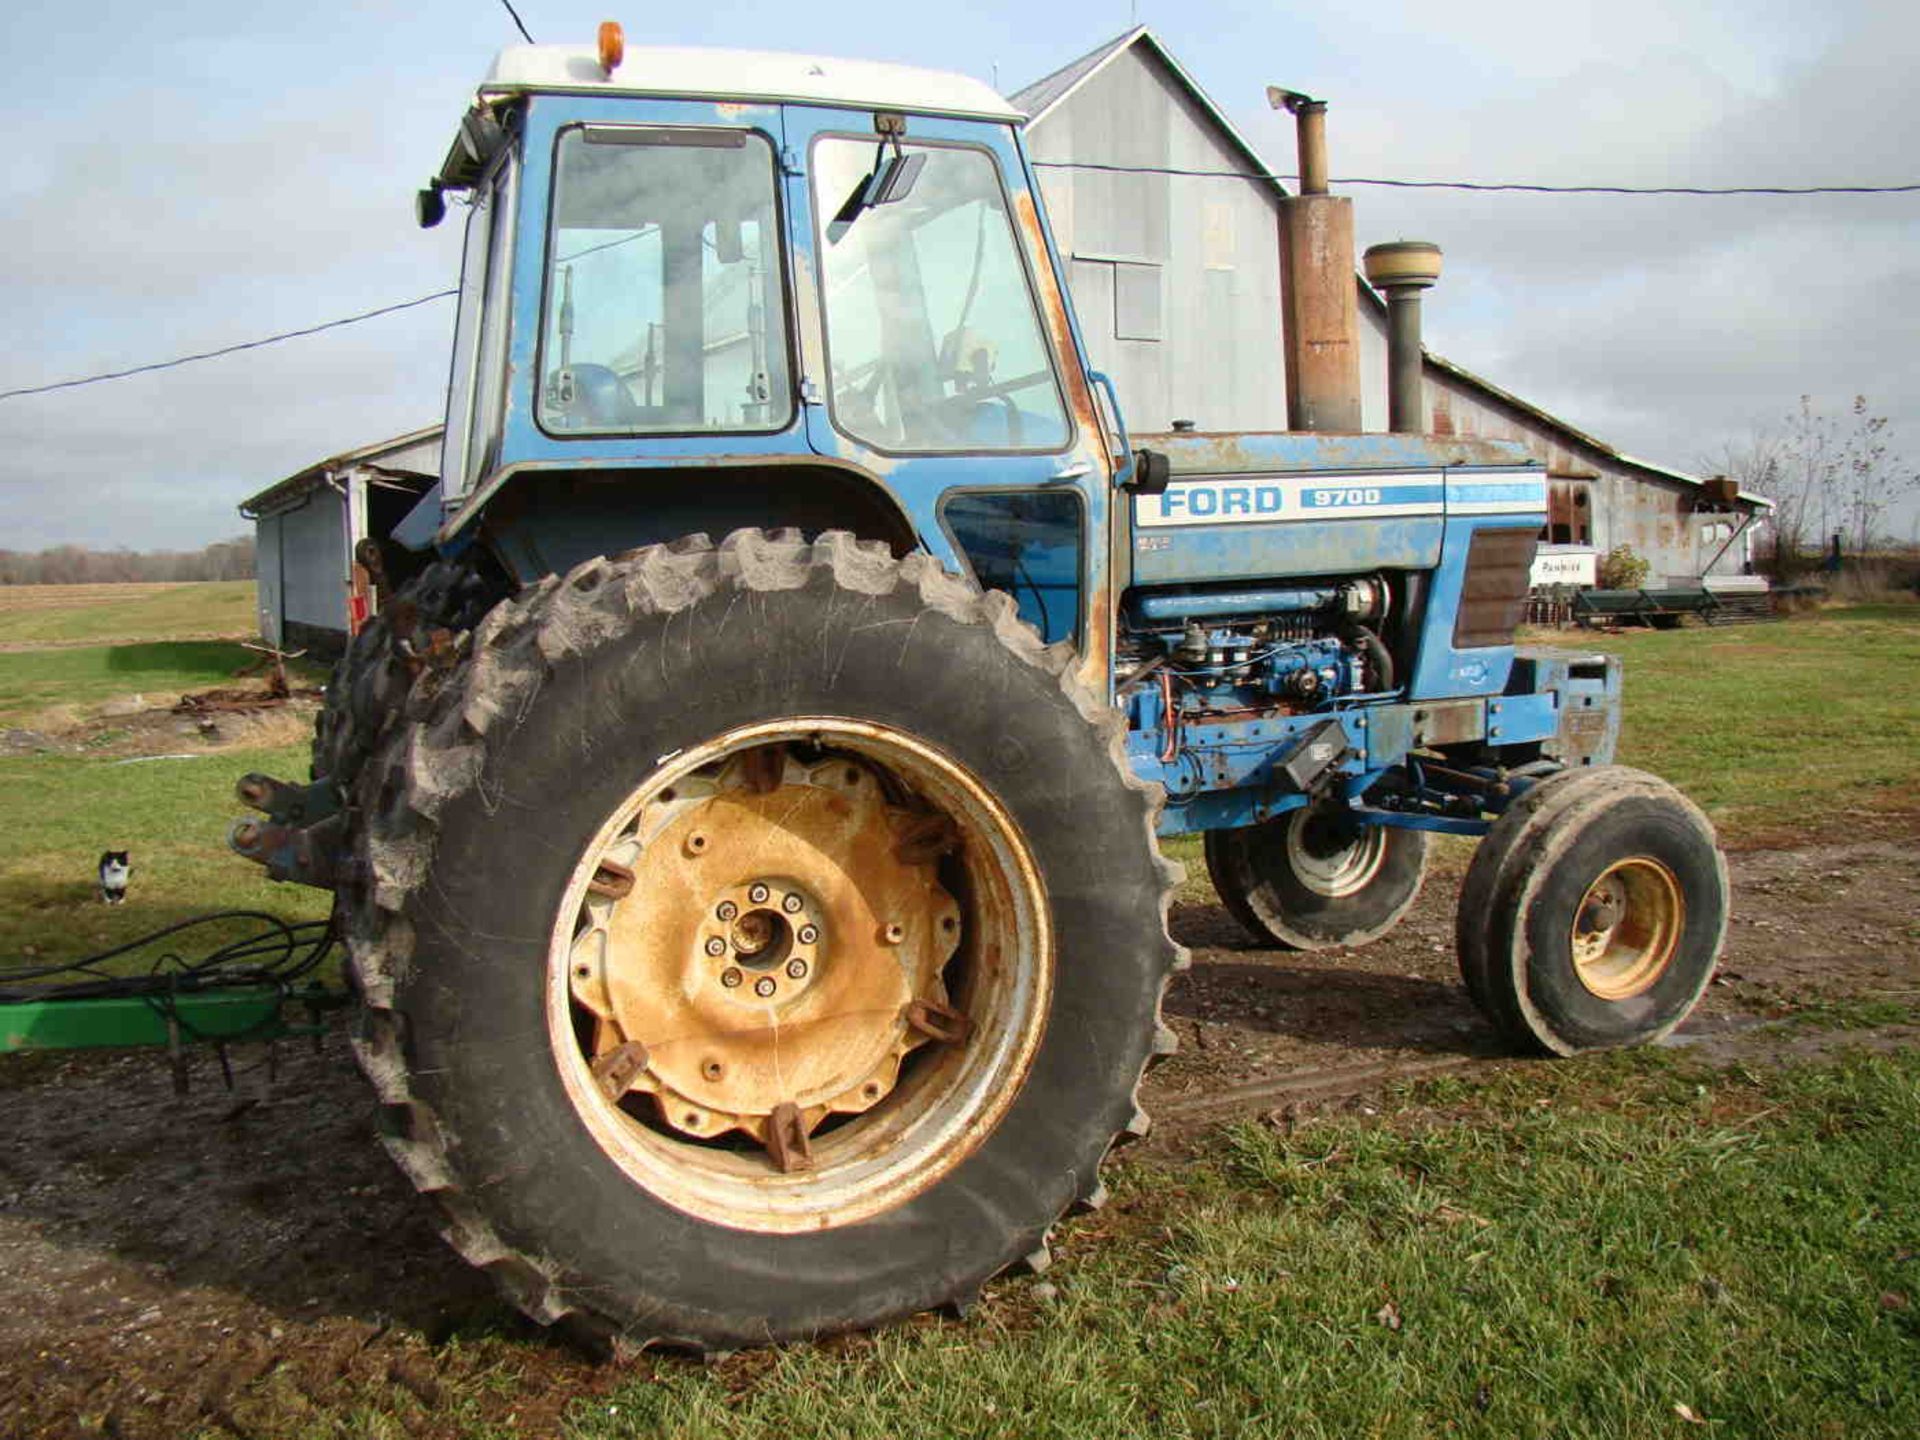 1978 Ford 9700 2wd tractor 8,272 hrs, w/duals Firestone 18.4-38, serial H2577B - Image 4 of 9